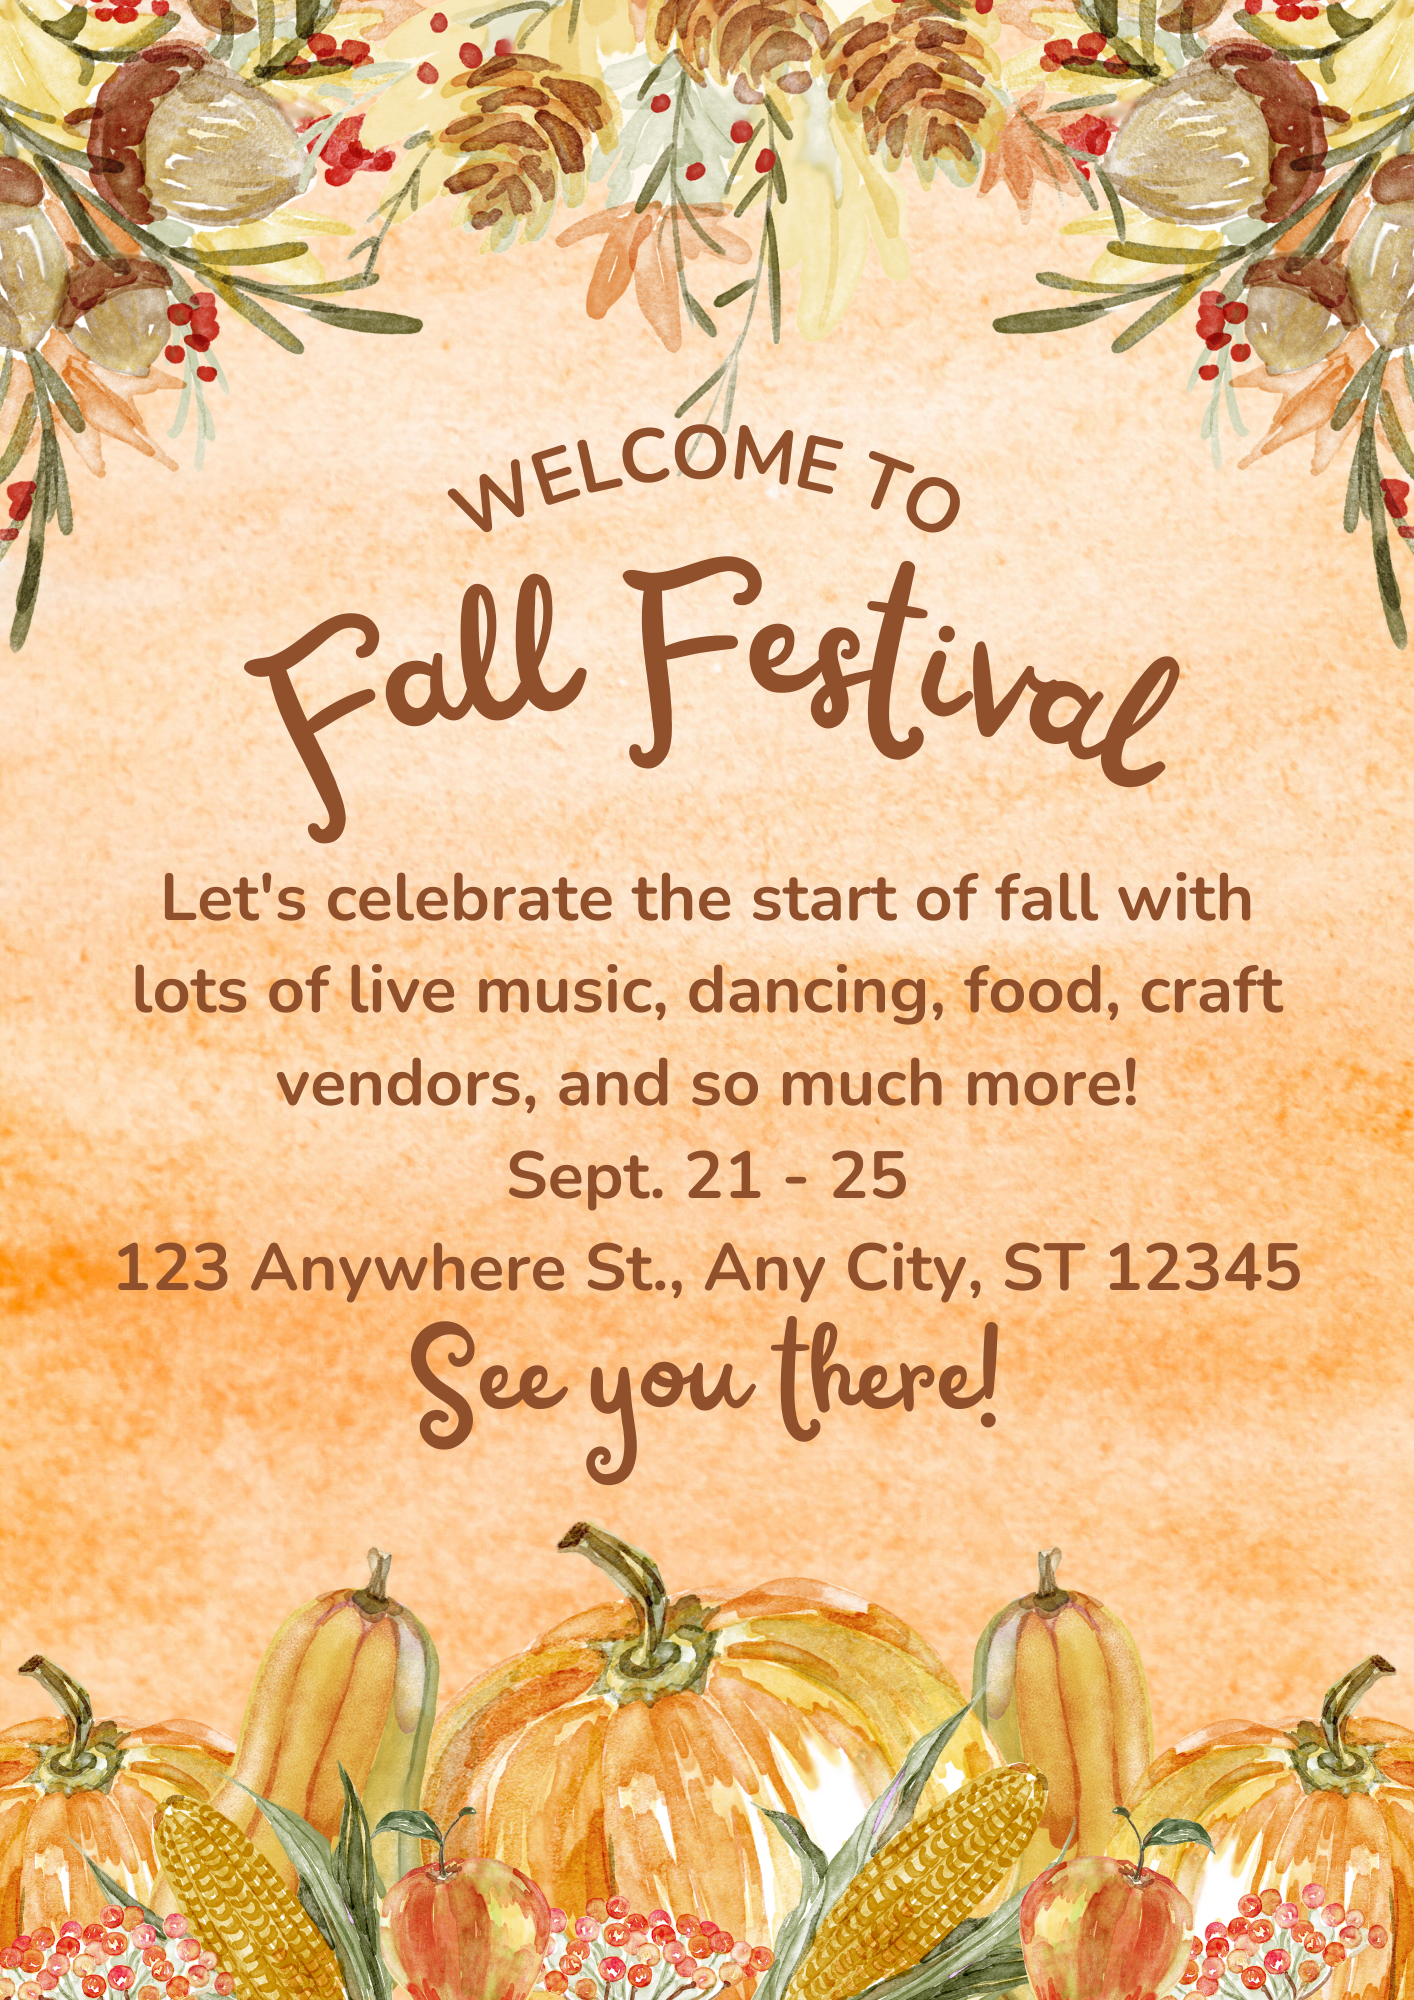 Flyer 4 - Orange Brown Yellow Colorful Watercolor Creative Fall Festival Flyer.png